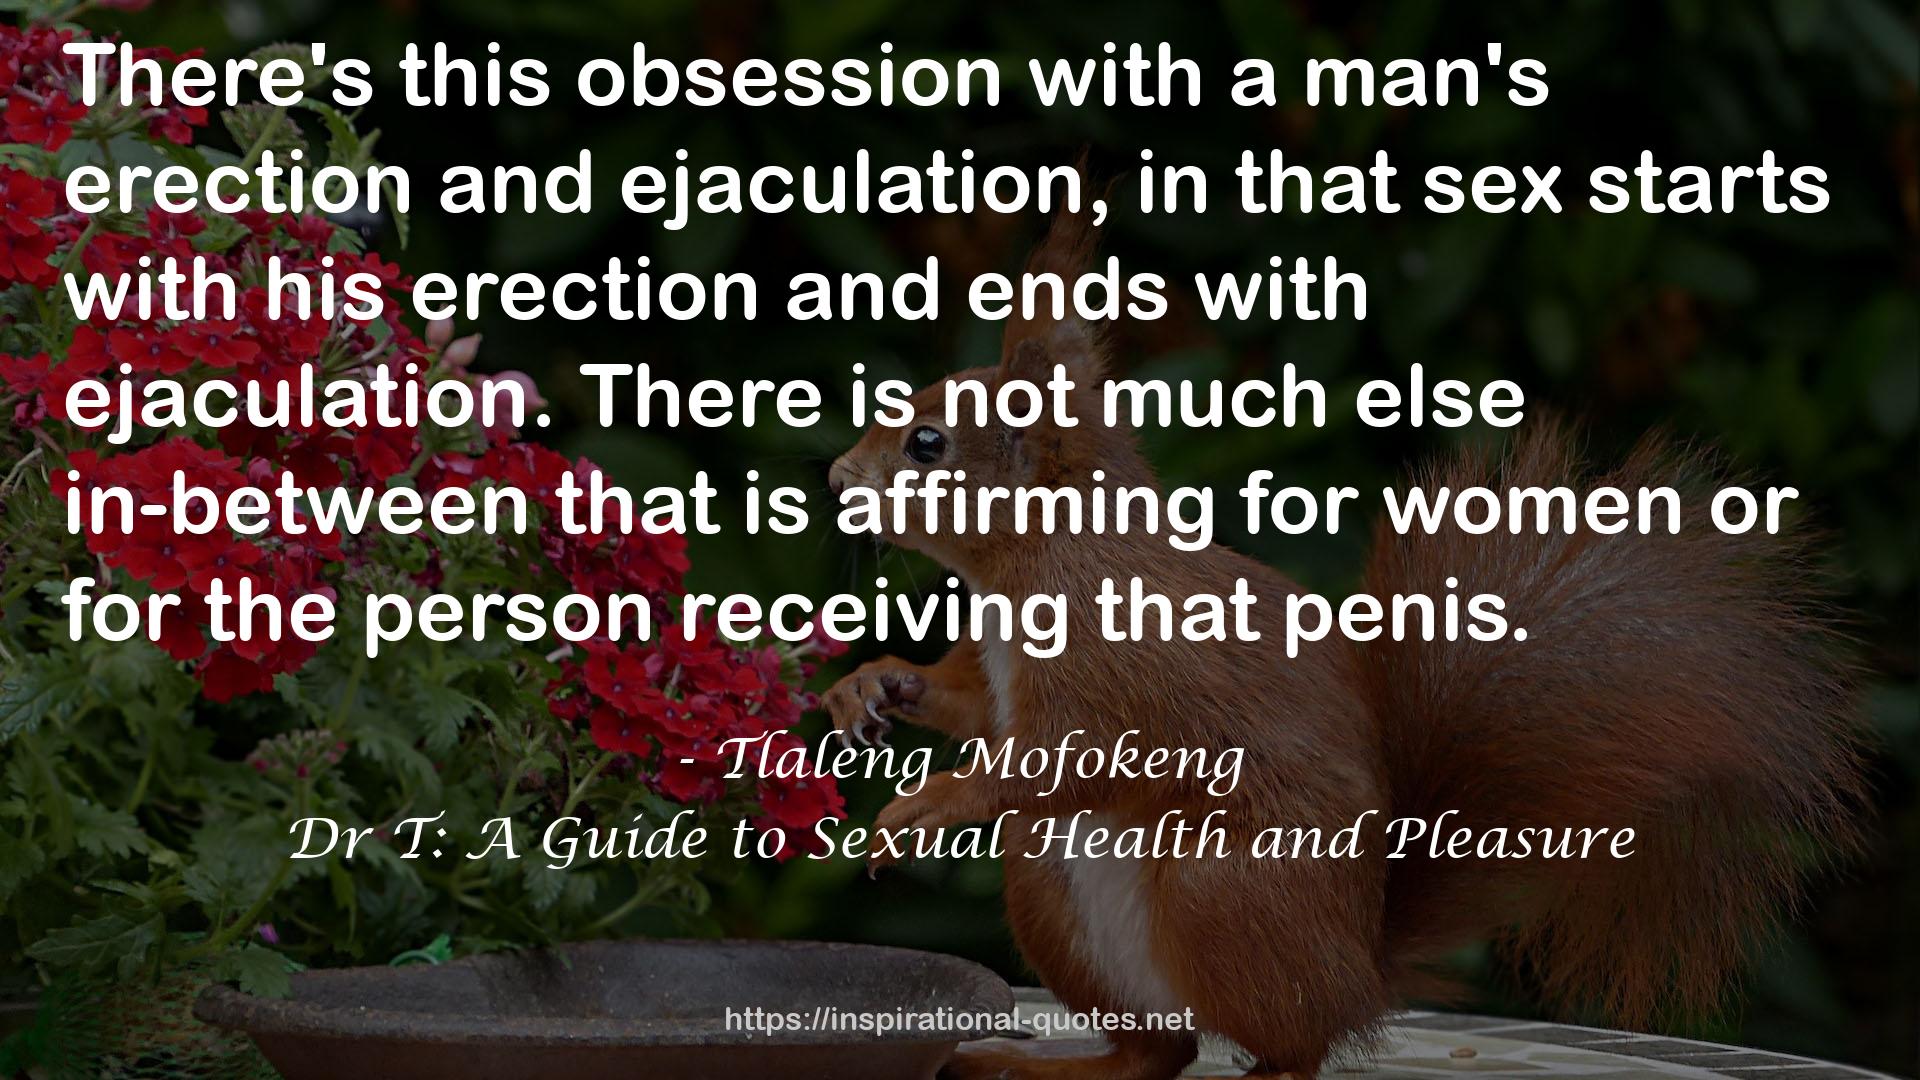 Dr T: A Guide to Sexual Health and Pleasure QUOTES